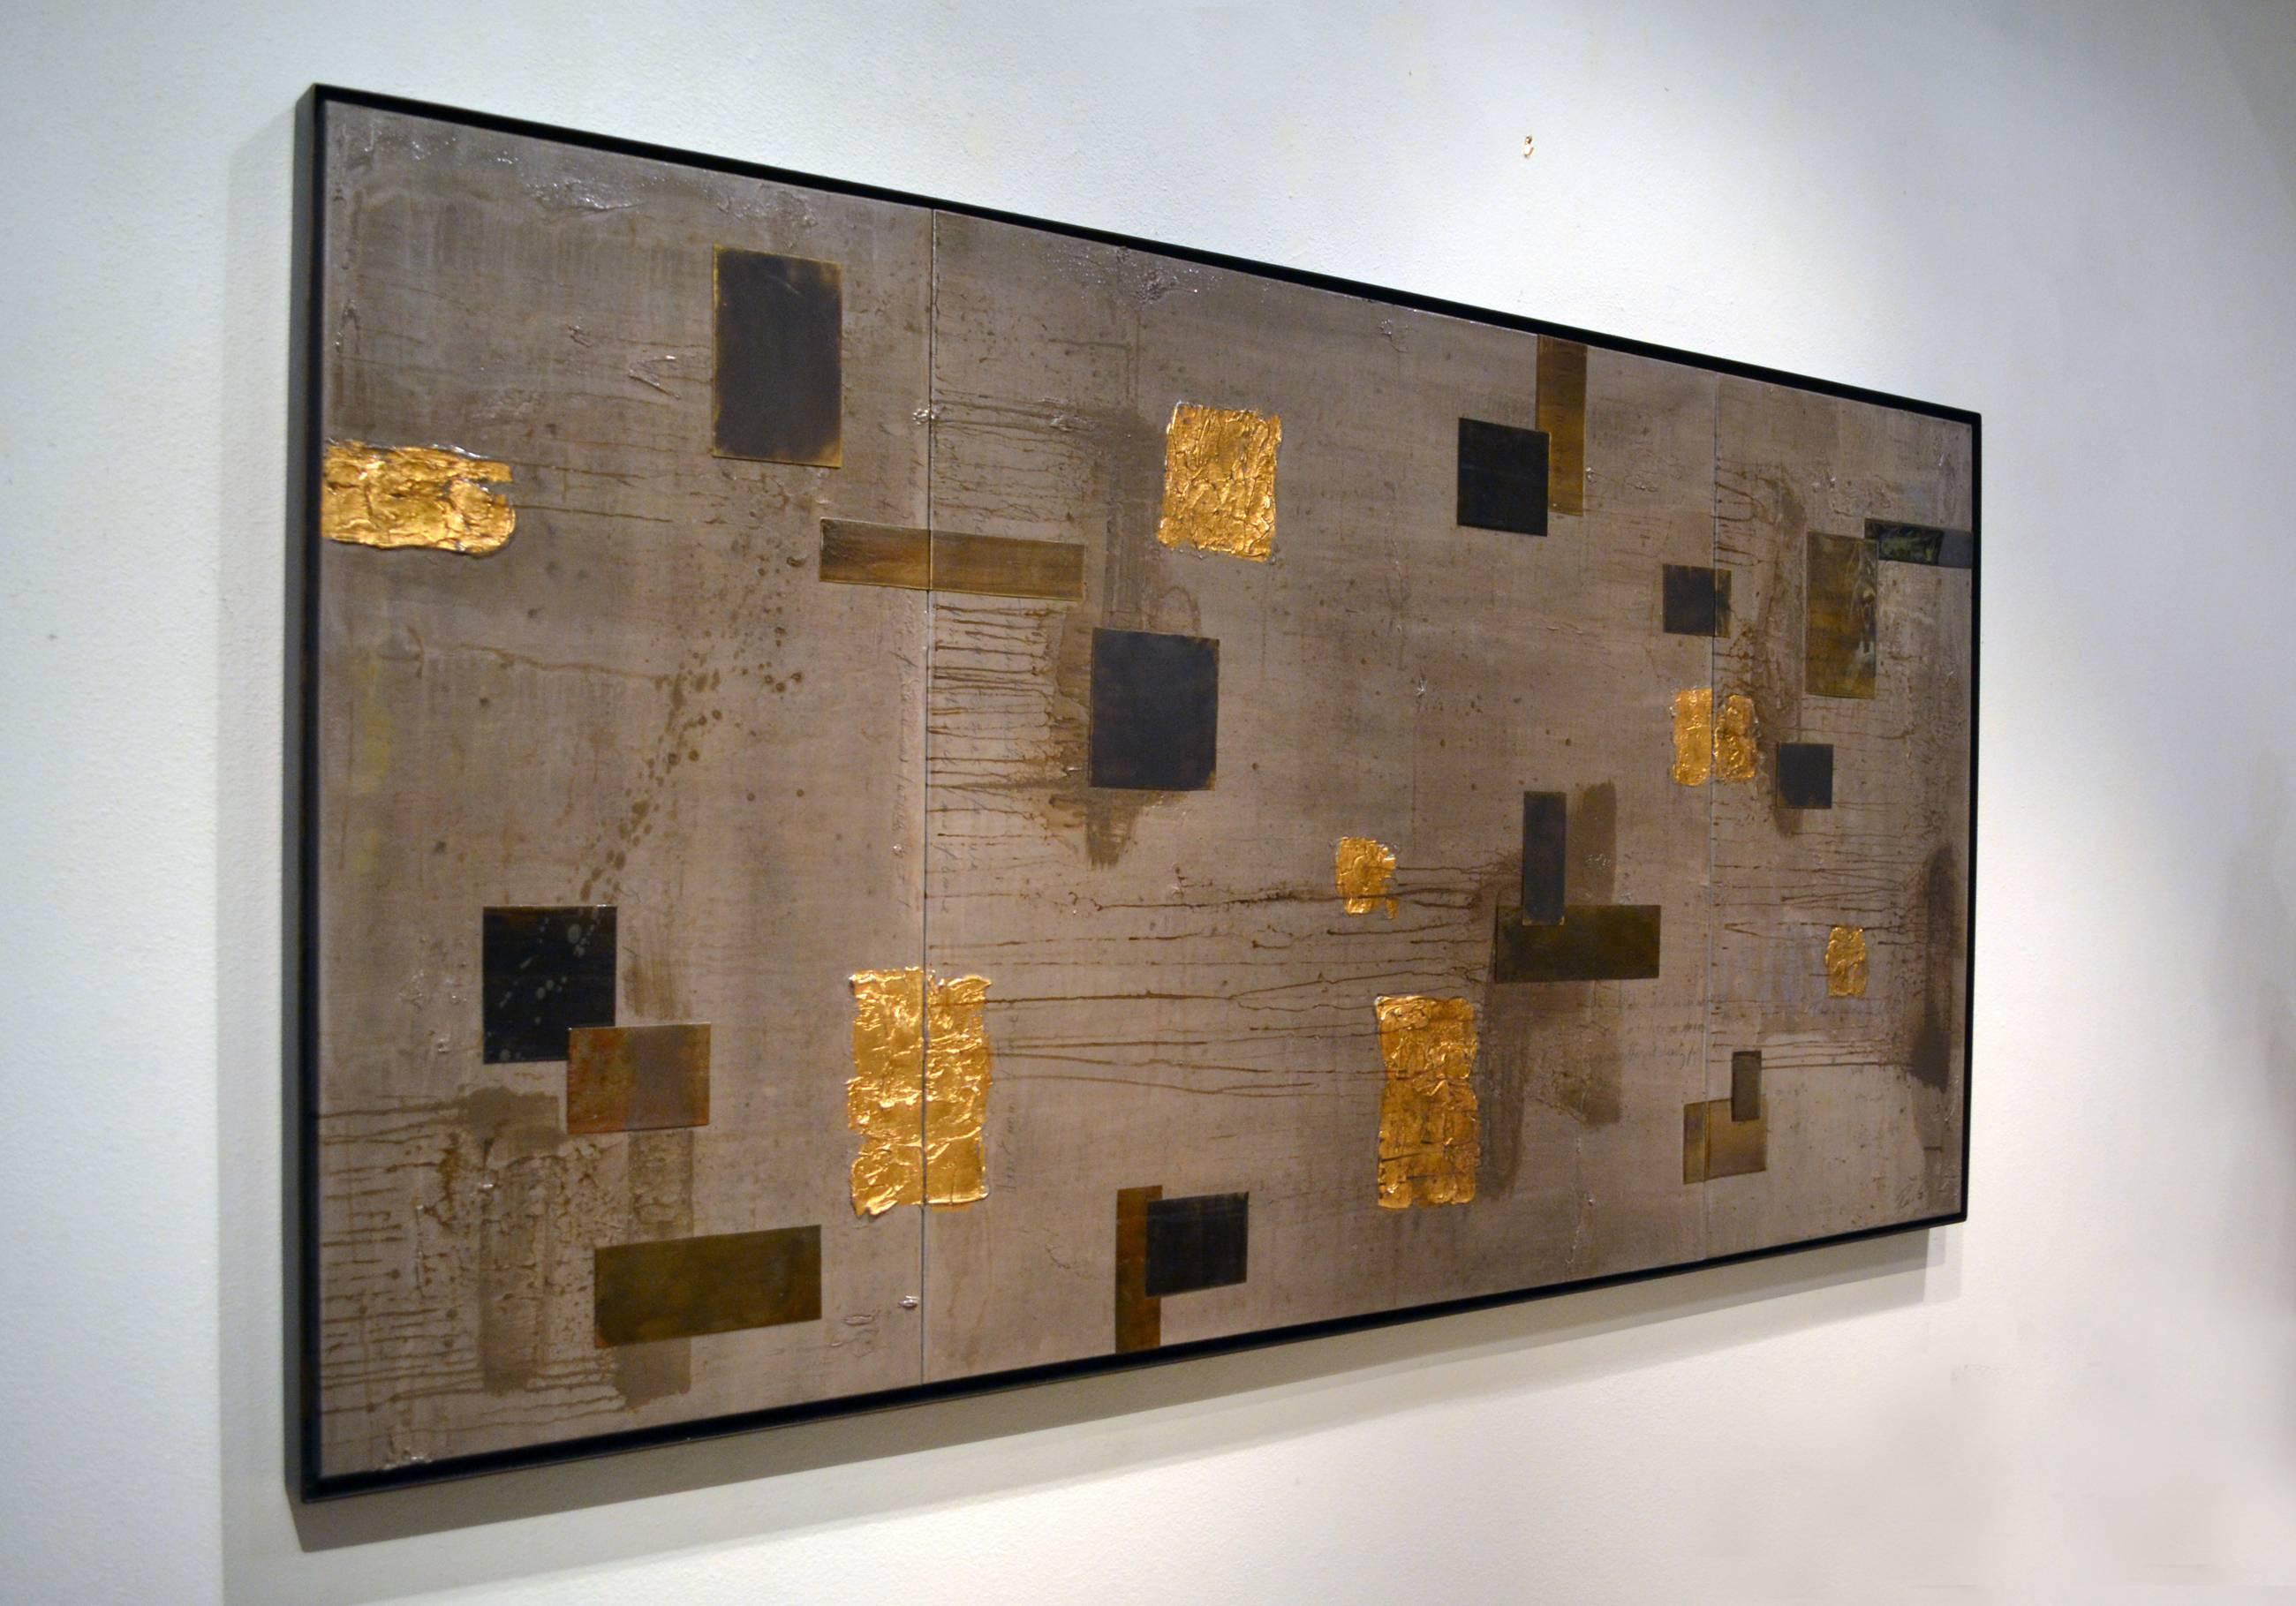 Artist Peri Gutierrez appropriately titled this exceptional mixed media abstract triptych Illumination. The artists use of various metals, including copper and the application of gold leaf elements over layers of paint washes that she then coats in